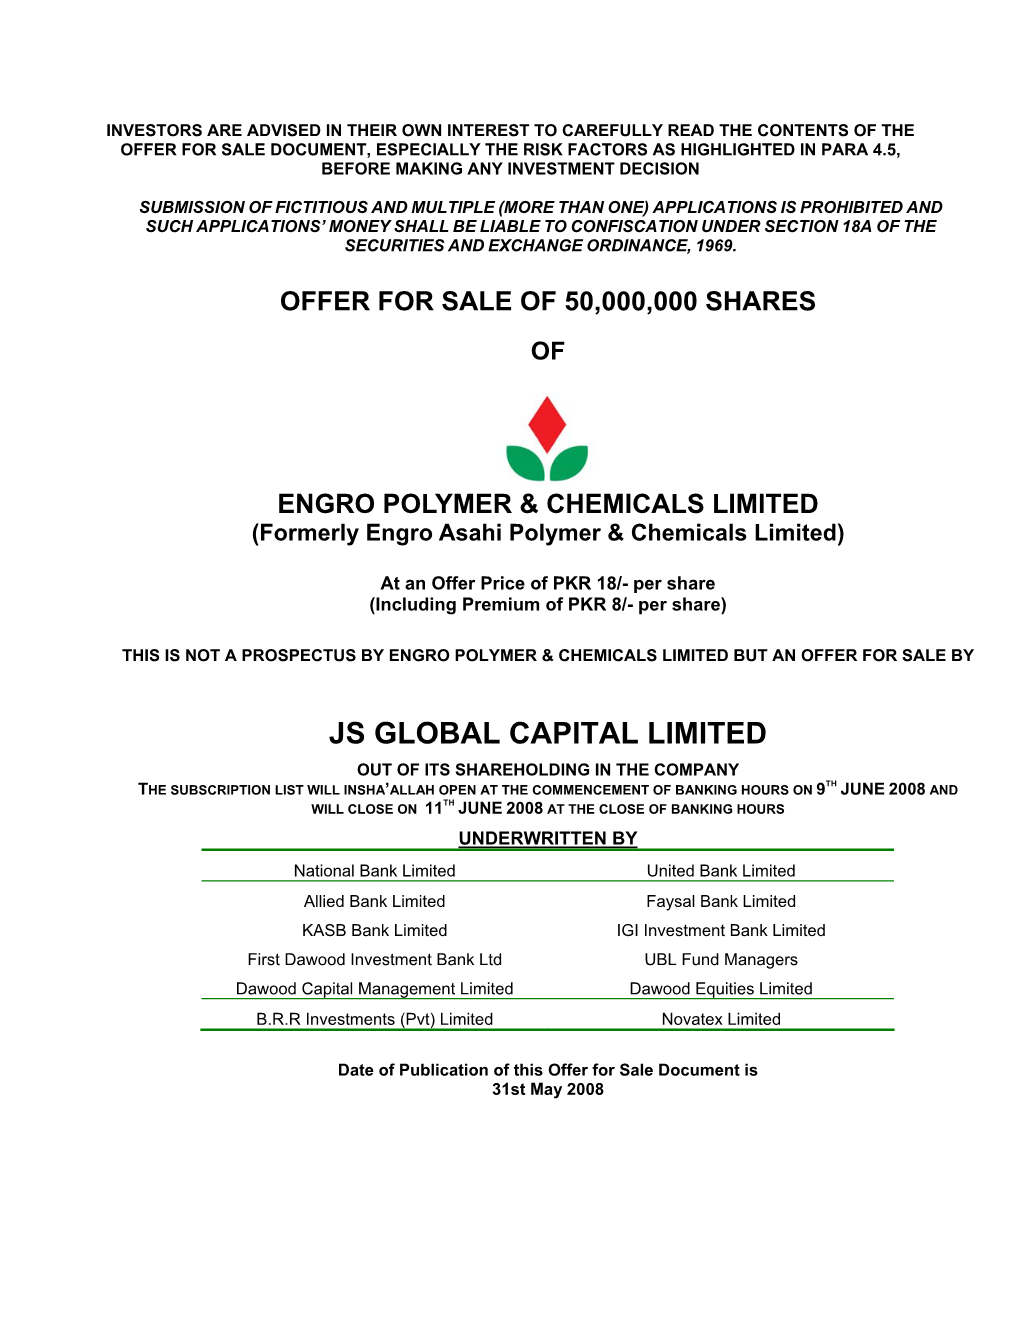 Offer for Sale of 50000000 Shares of Engro Polymer & Chemicals Limited